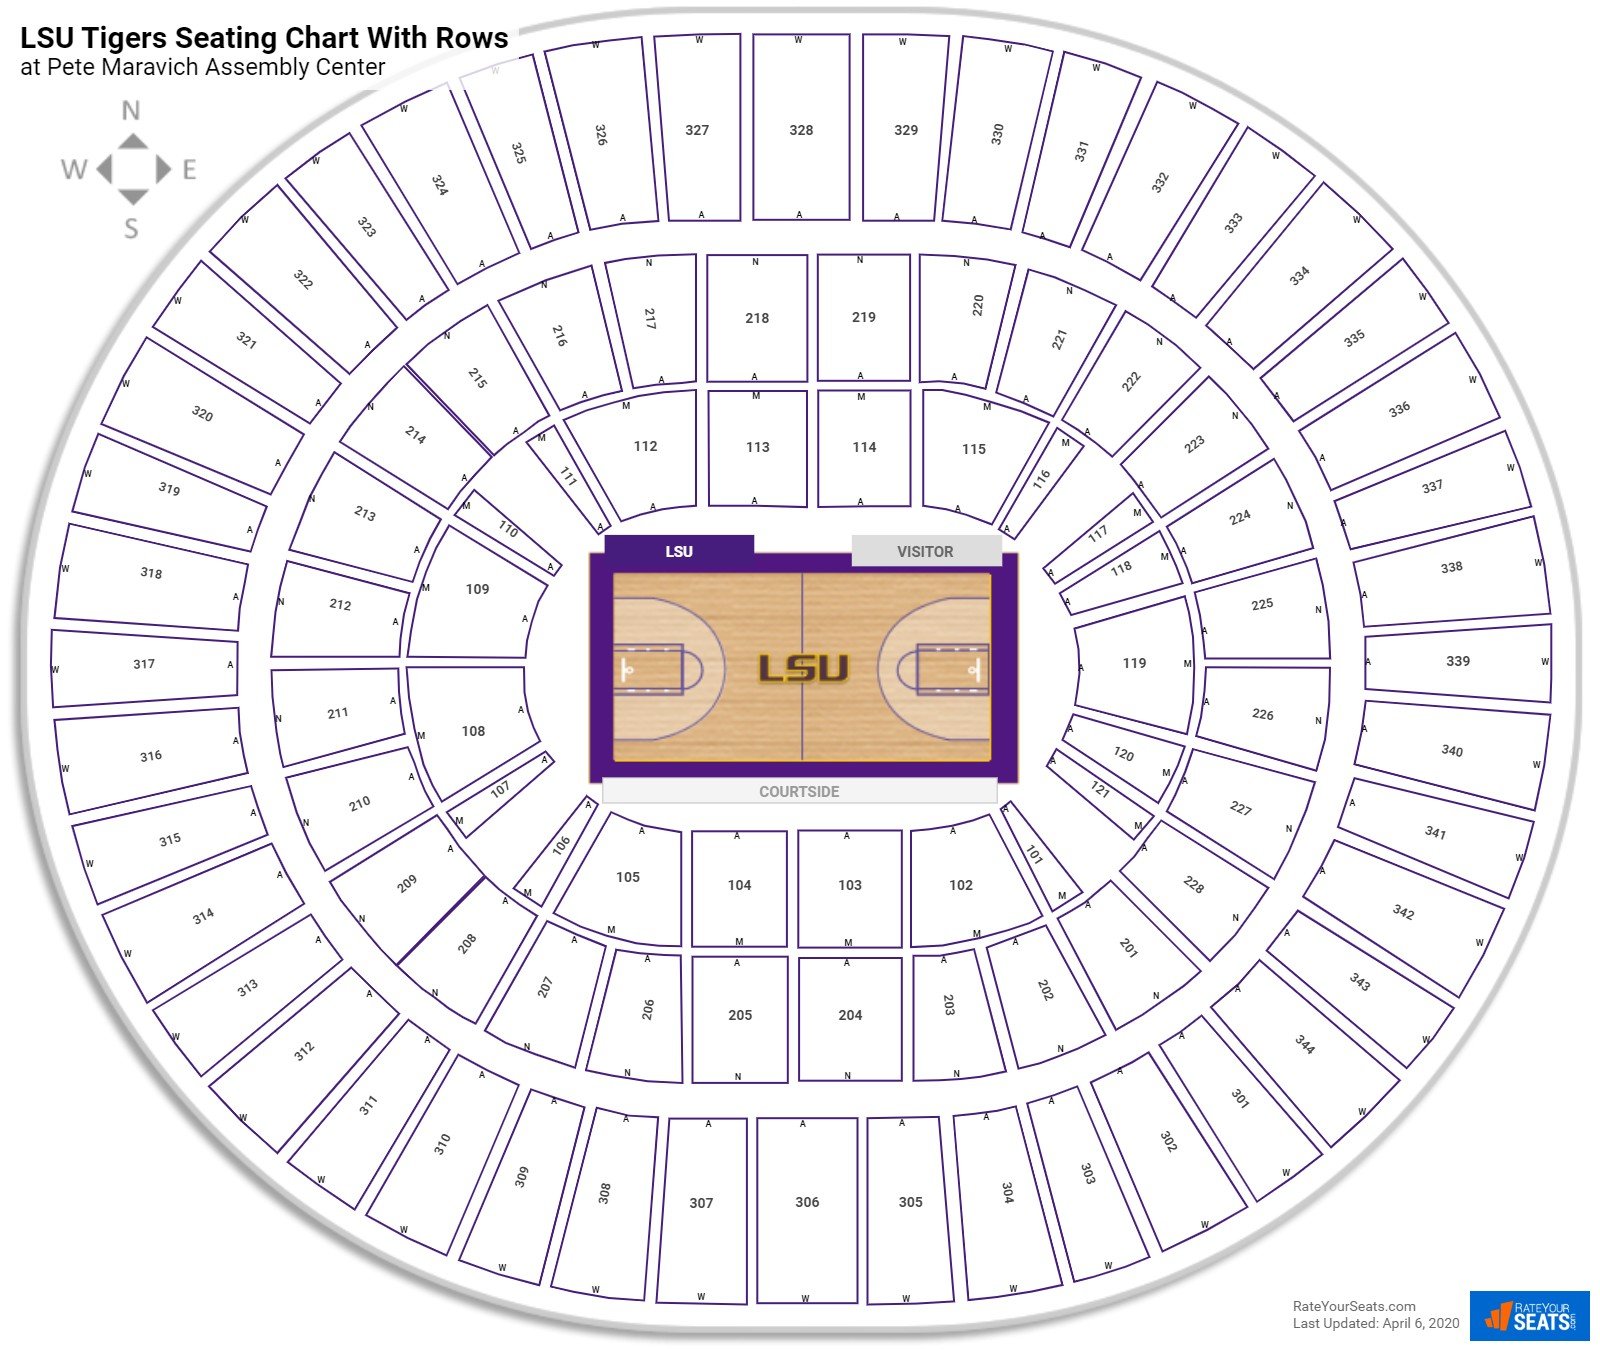 Pete Maravich Assembly Center seating chart with row numbers